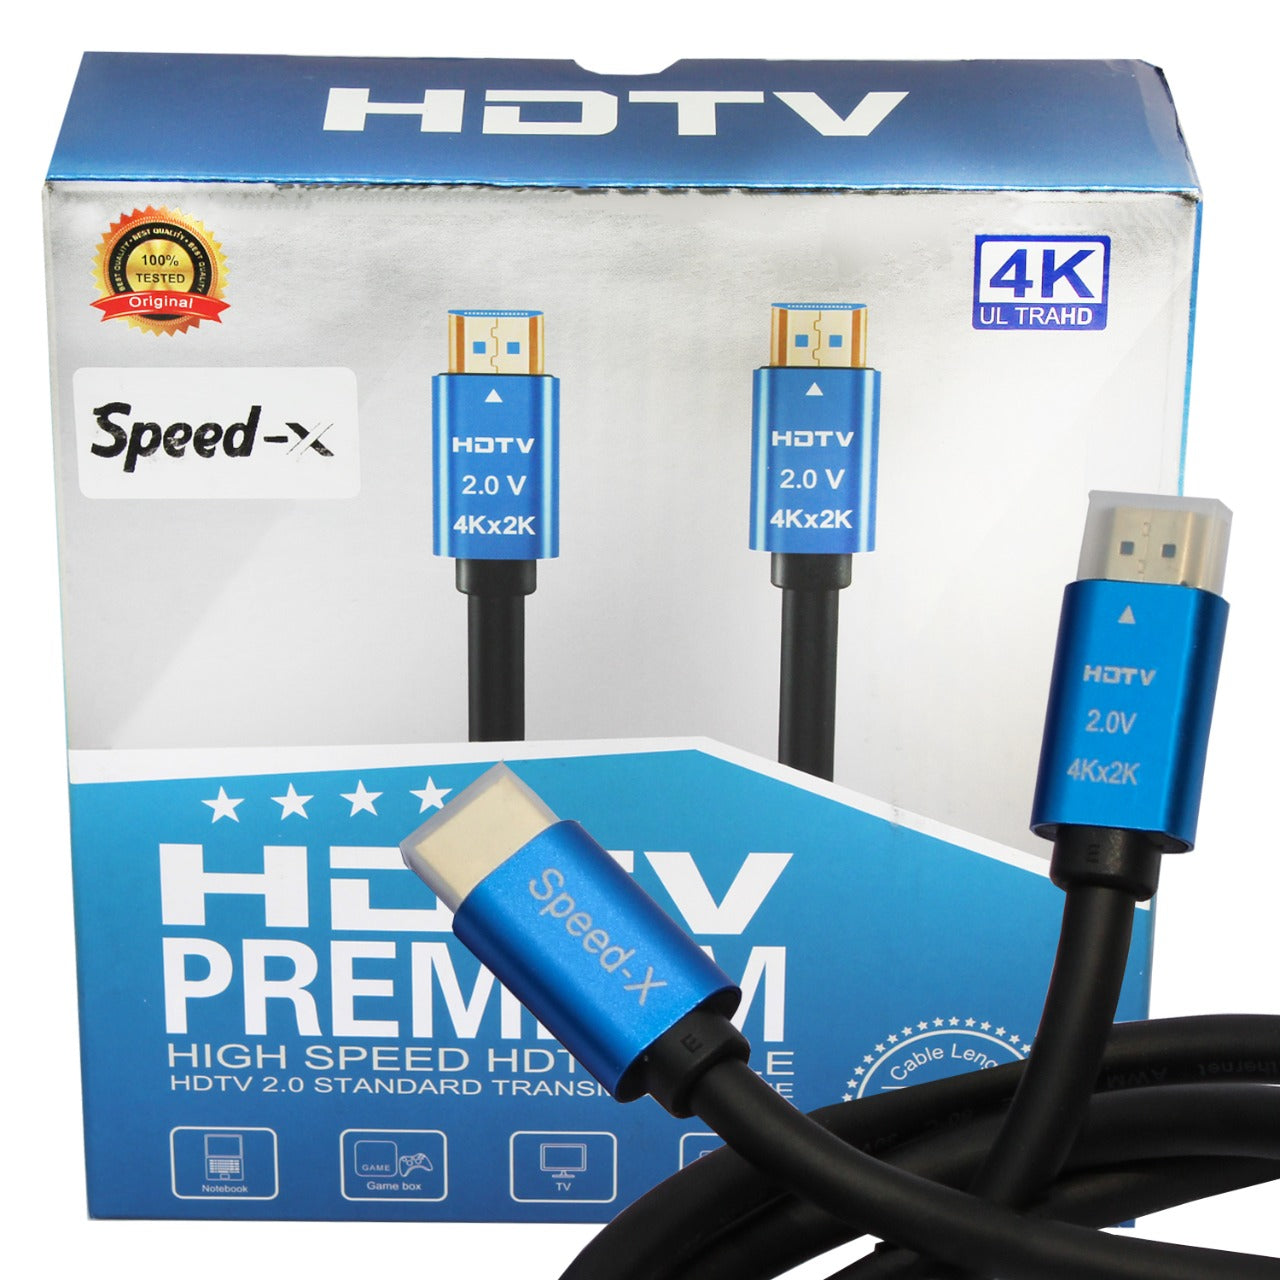 CABLE HDMI 5M 4K PREMIUM 2.0V - HDR & HIGH SPEED